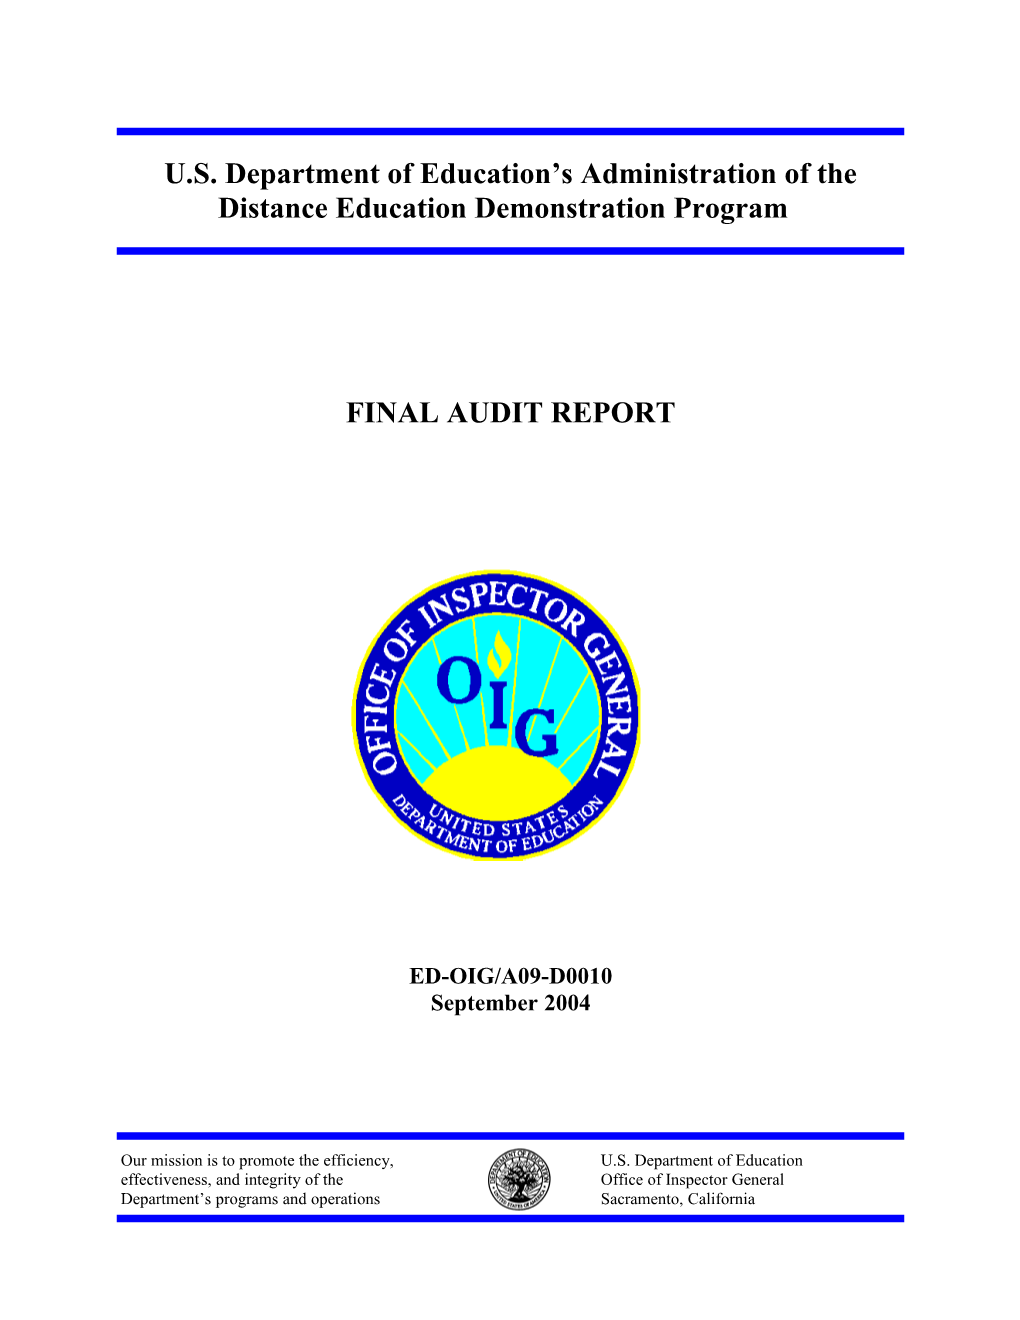 US Department of Education's Administration of the Distance Education Demonstration Program